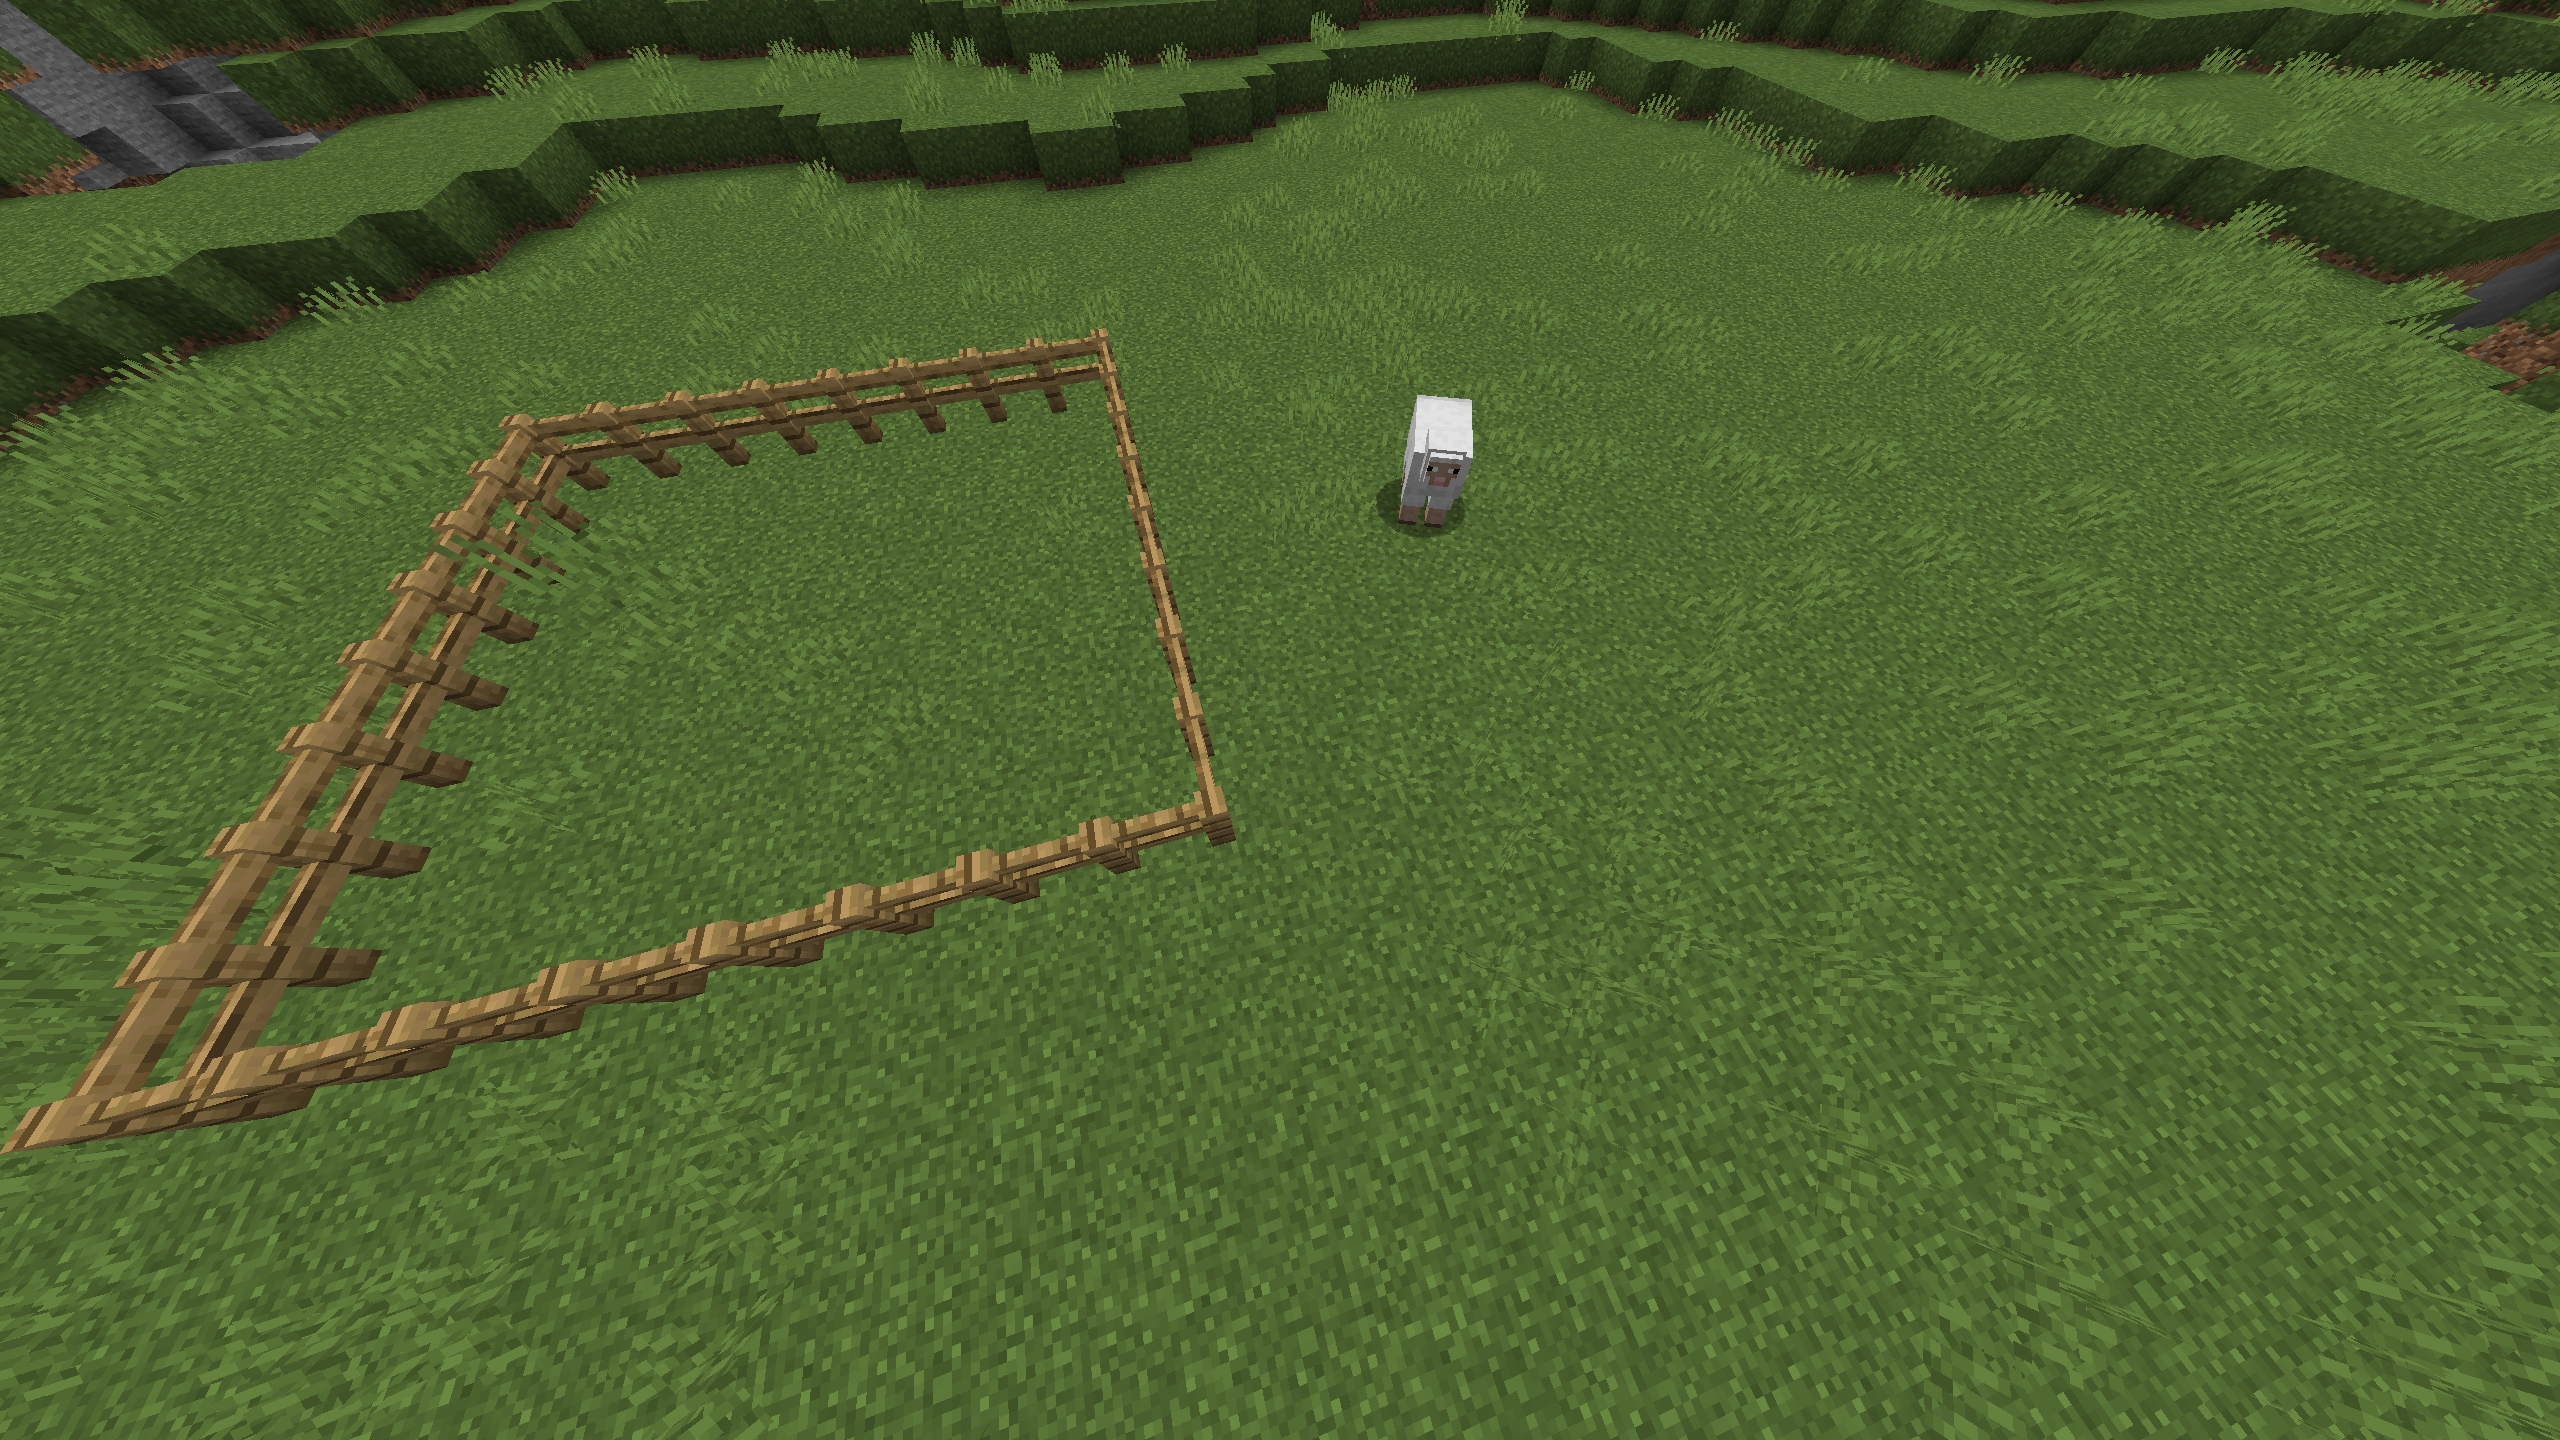 Minecraft Memes - Sheep jumped fence and now... Zzzzzzzzz...